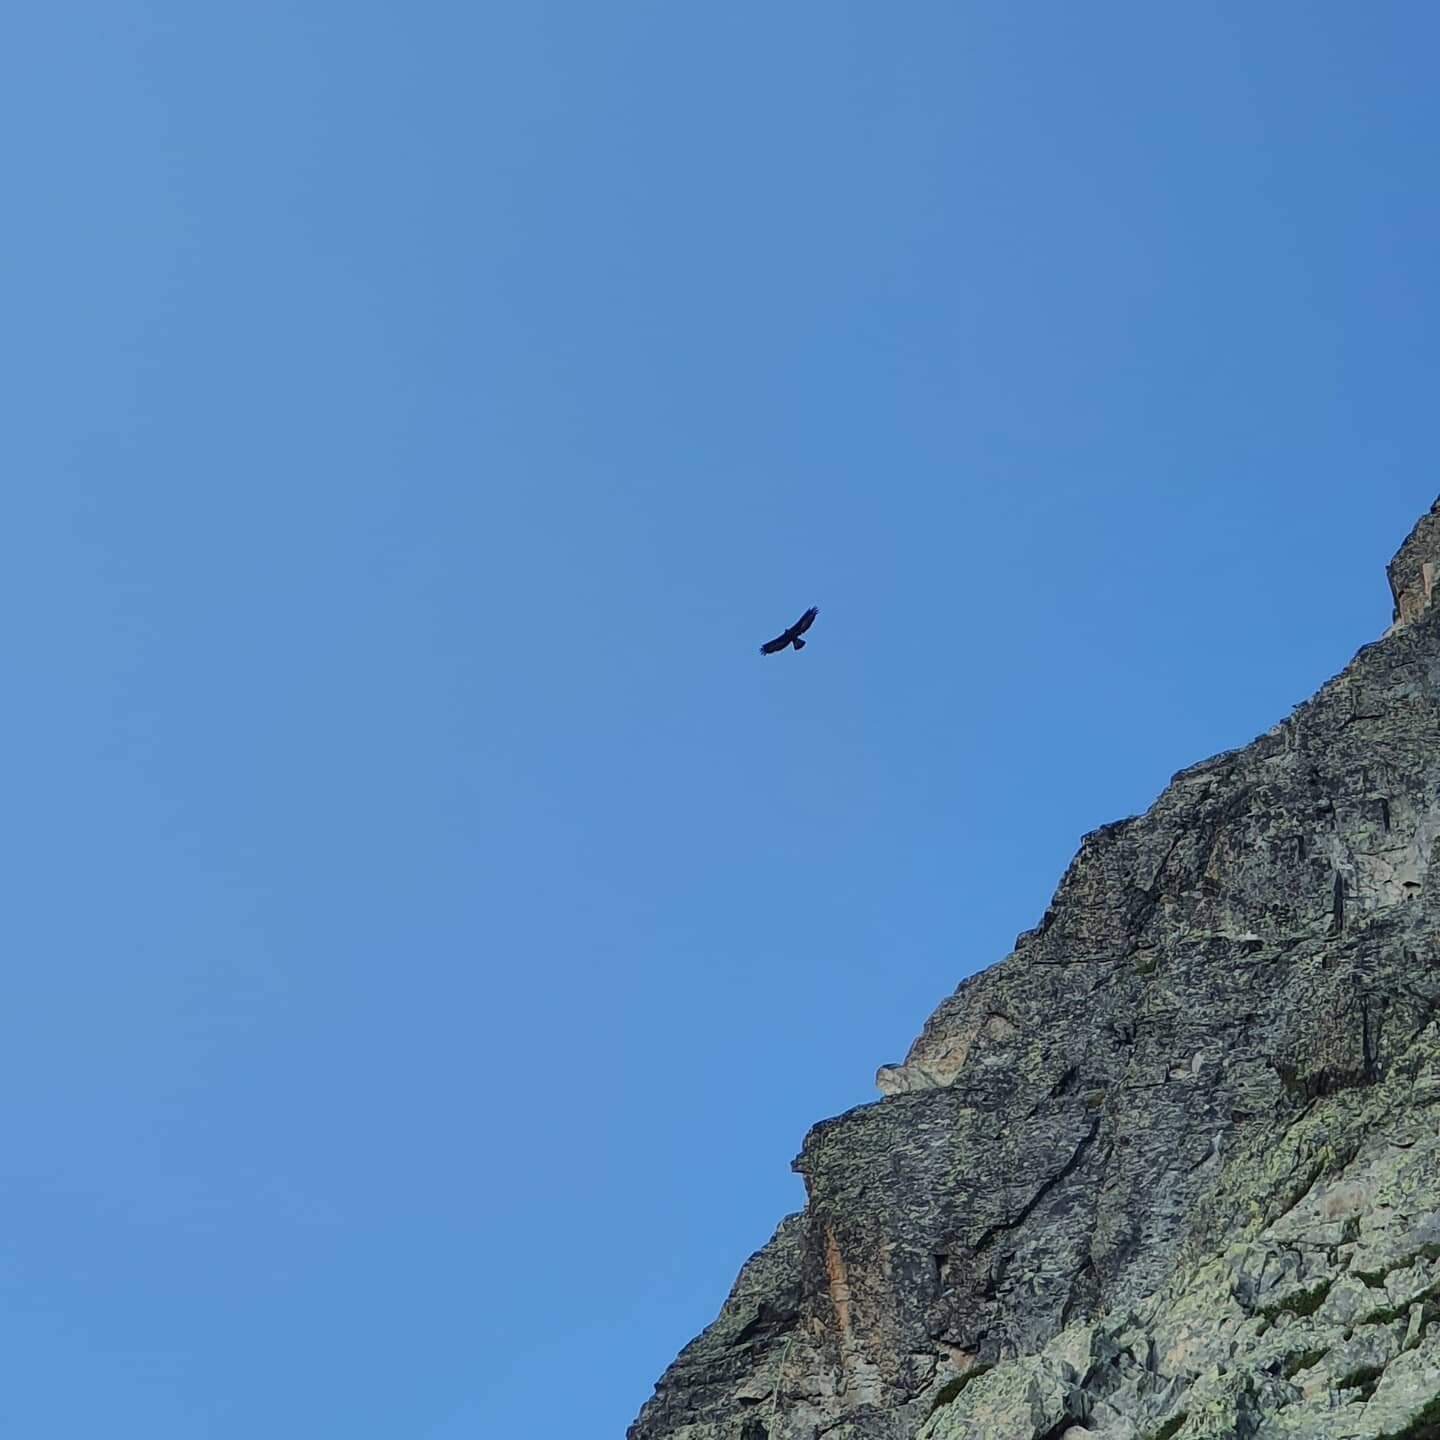 Al wanted to squeeze in a couple of routes before his family arrived this afternoon so under the watchful eye of the soaring eagle, we did just that. 
We also saw a Marmott so surely that's two of the 'chamonix big 5'!? 👌

Despite being #utmb week, 